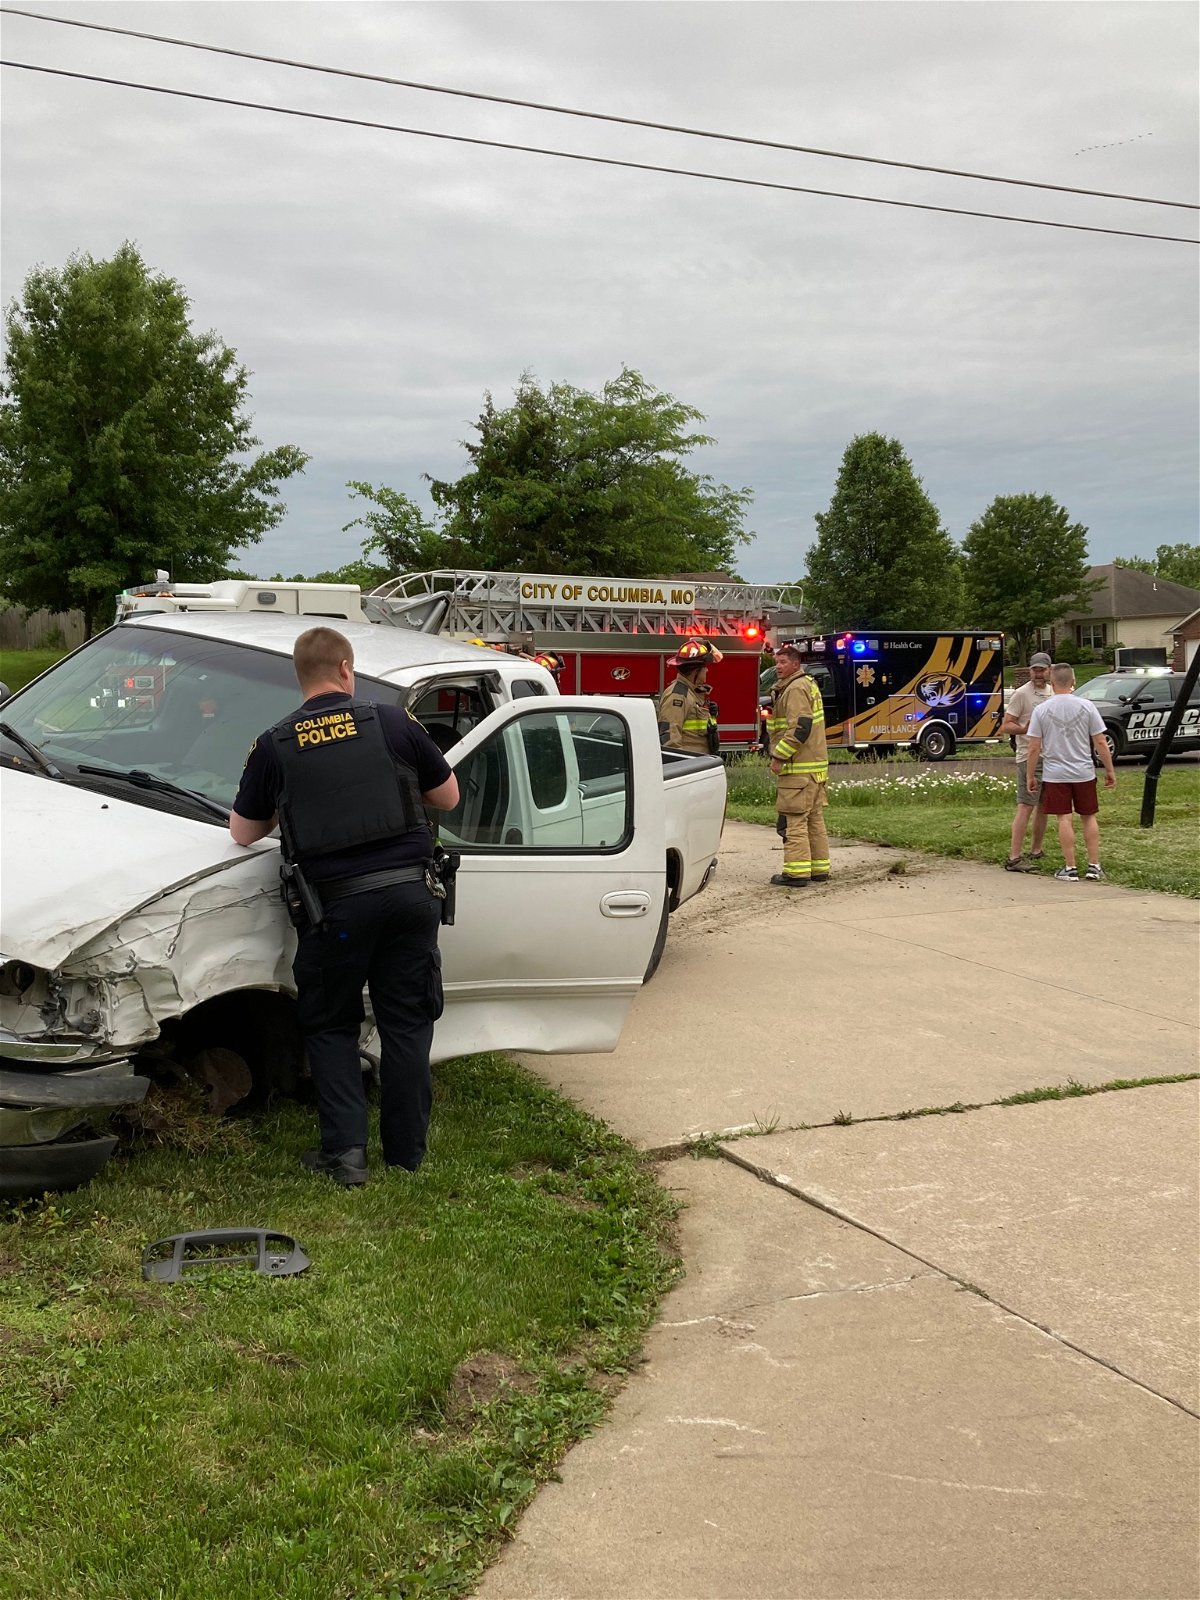 Columbia Fire working an MVC on Mexico Gravel, at least one injured
